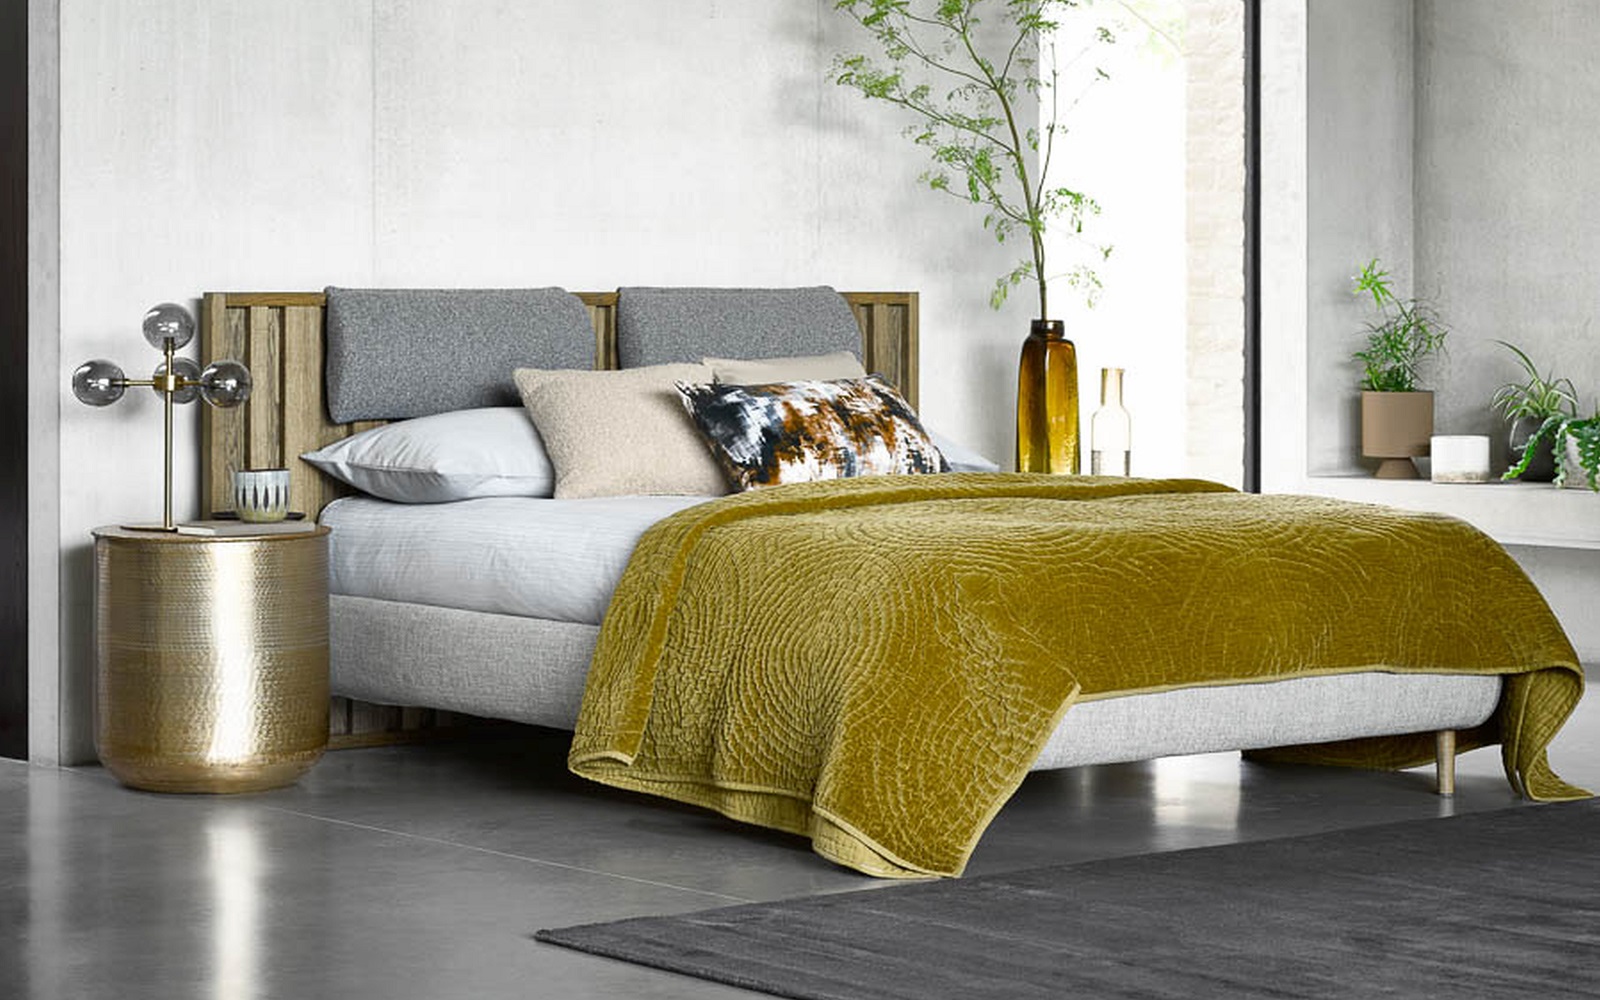 wood and upholstered bed with mustard throw and grey concrete floor. Bed design by sofa.com